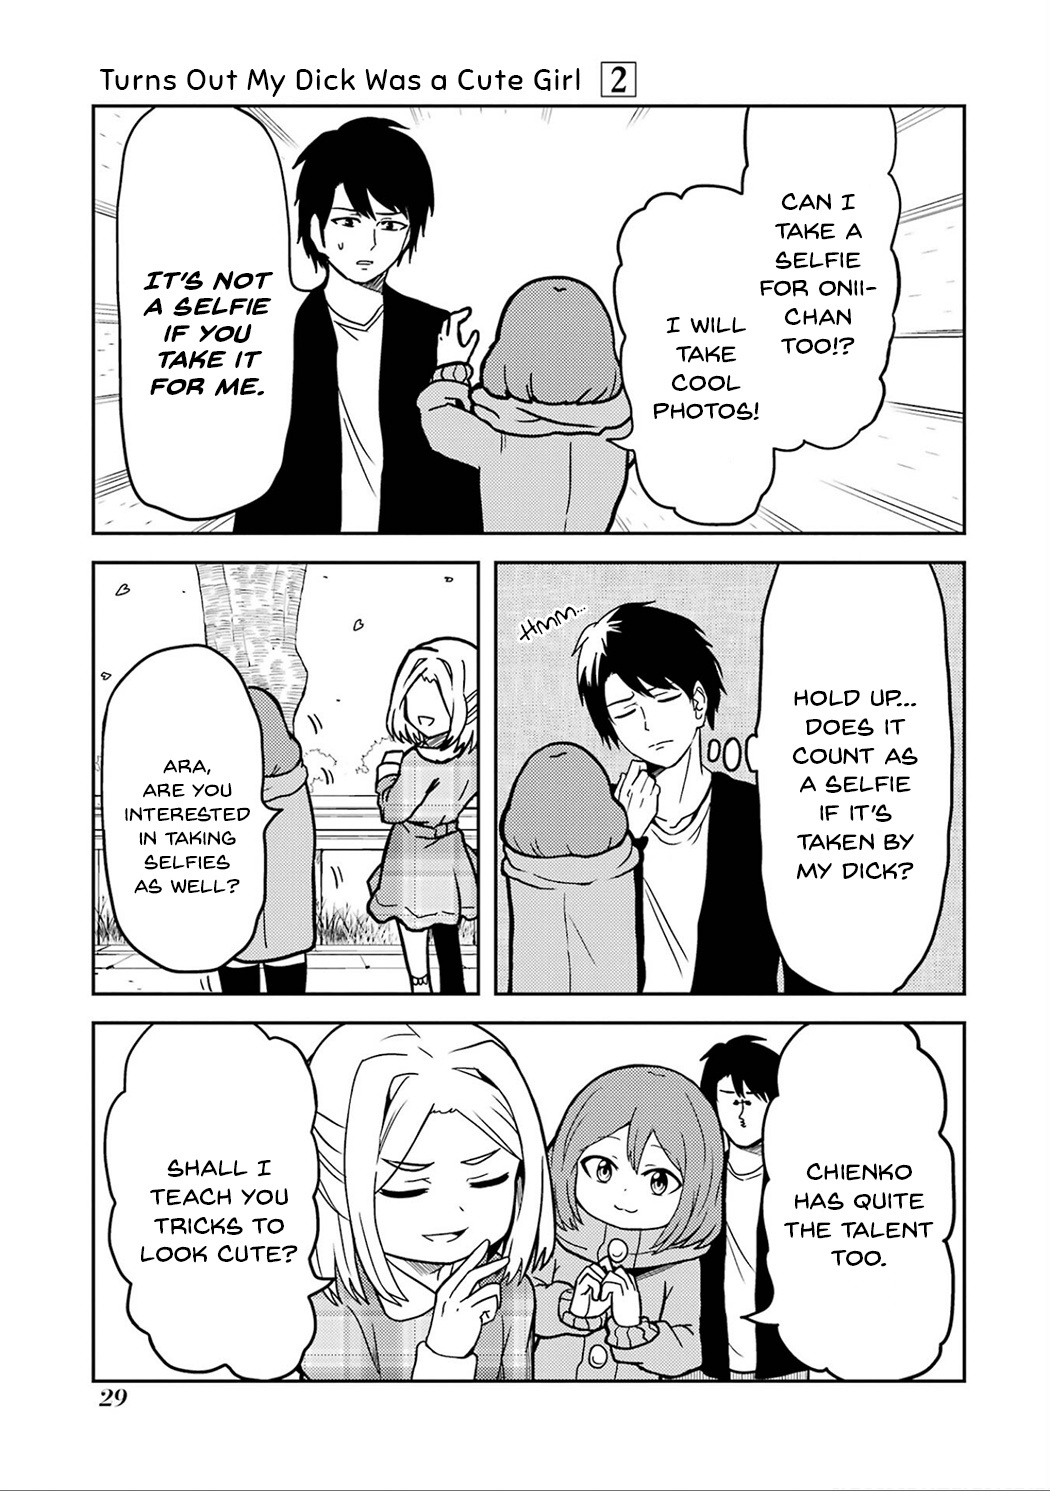 Turns Out My Dick Was A Cute Girl Vol.2 Chapter 17: My Dick Takes A Selfie - Picture 3